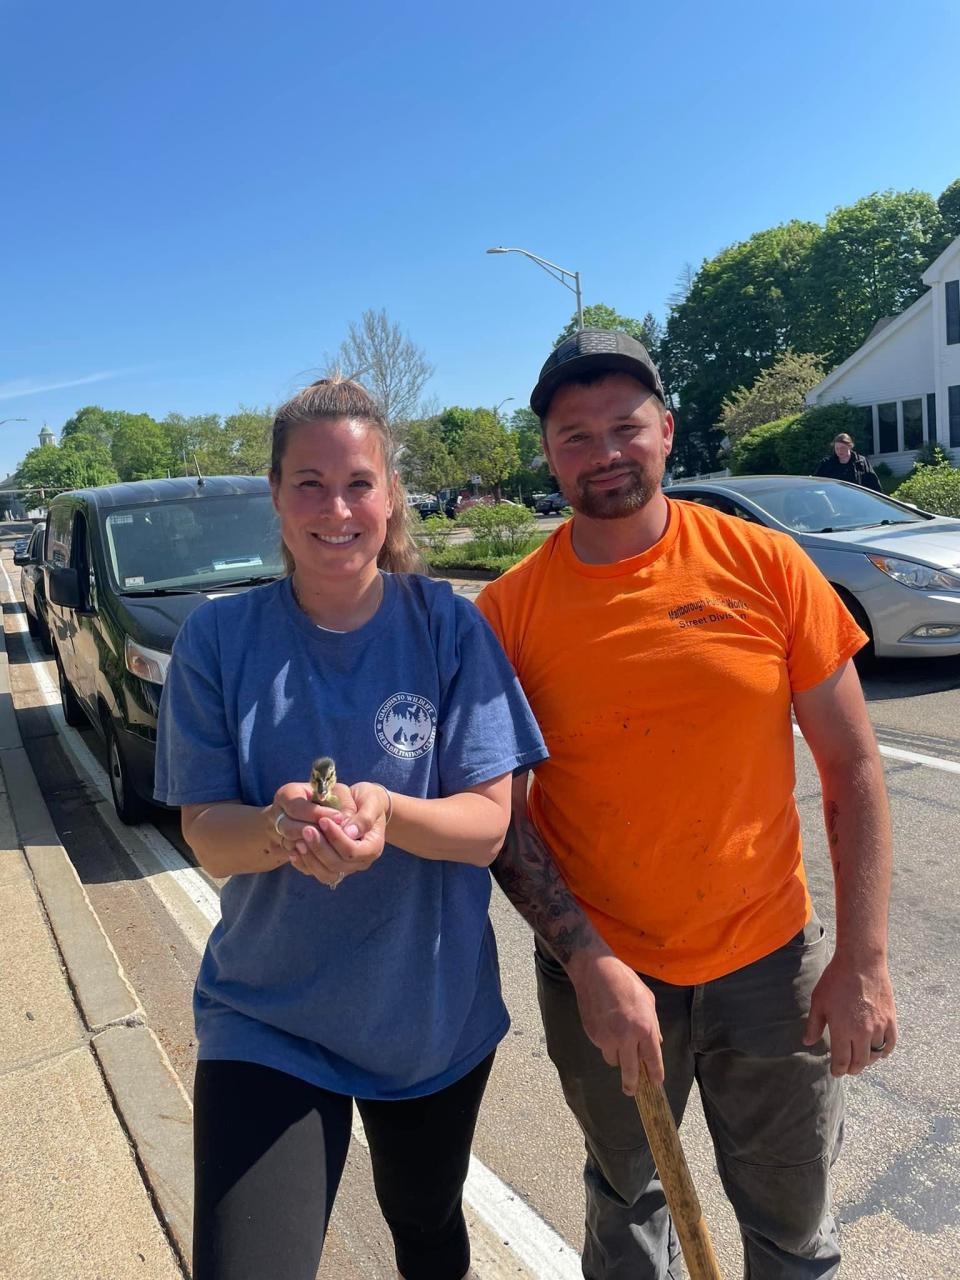 Alyssa Giaquinto of The Giaquinto Wildlife Rehabilitation Center, holds one of the rescued ducklings. Marlborough Public Works employee Alex Szczepaniak assisted in removing the storm drain cover where the ducklings had fallen.